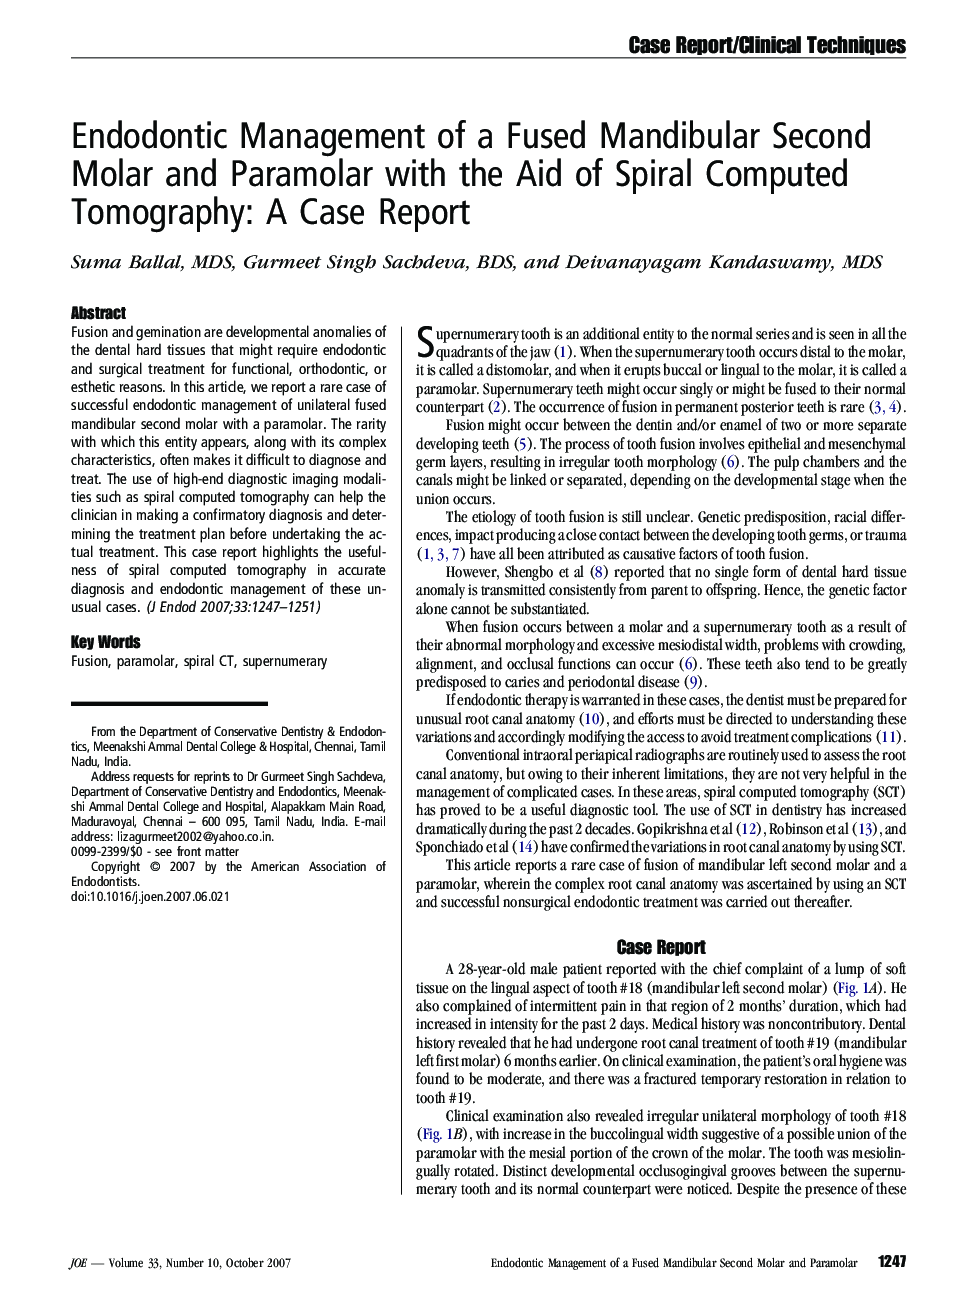 Endodontic Management of a Fused Mandibular Second Molar and Paramolar with the Aid of Spiral Computed Tomography: A Case Report